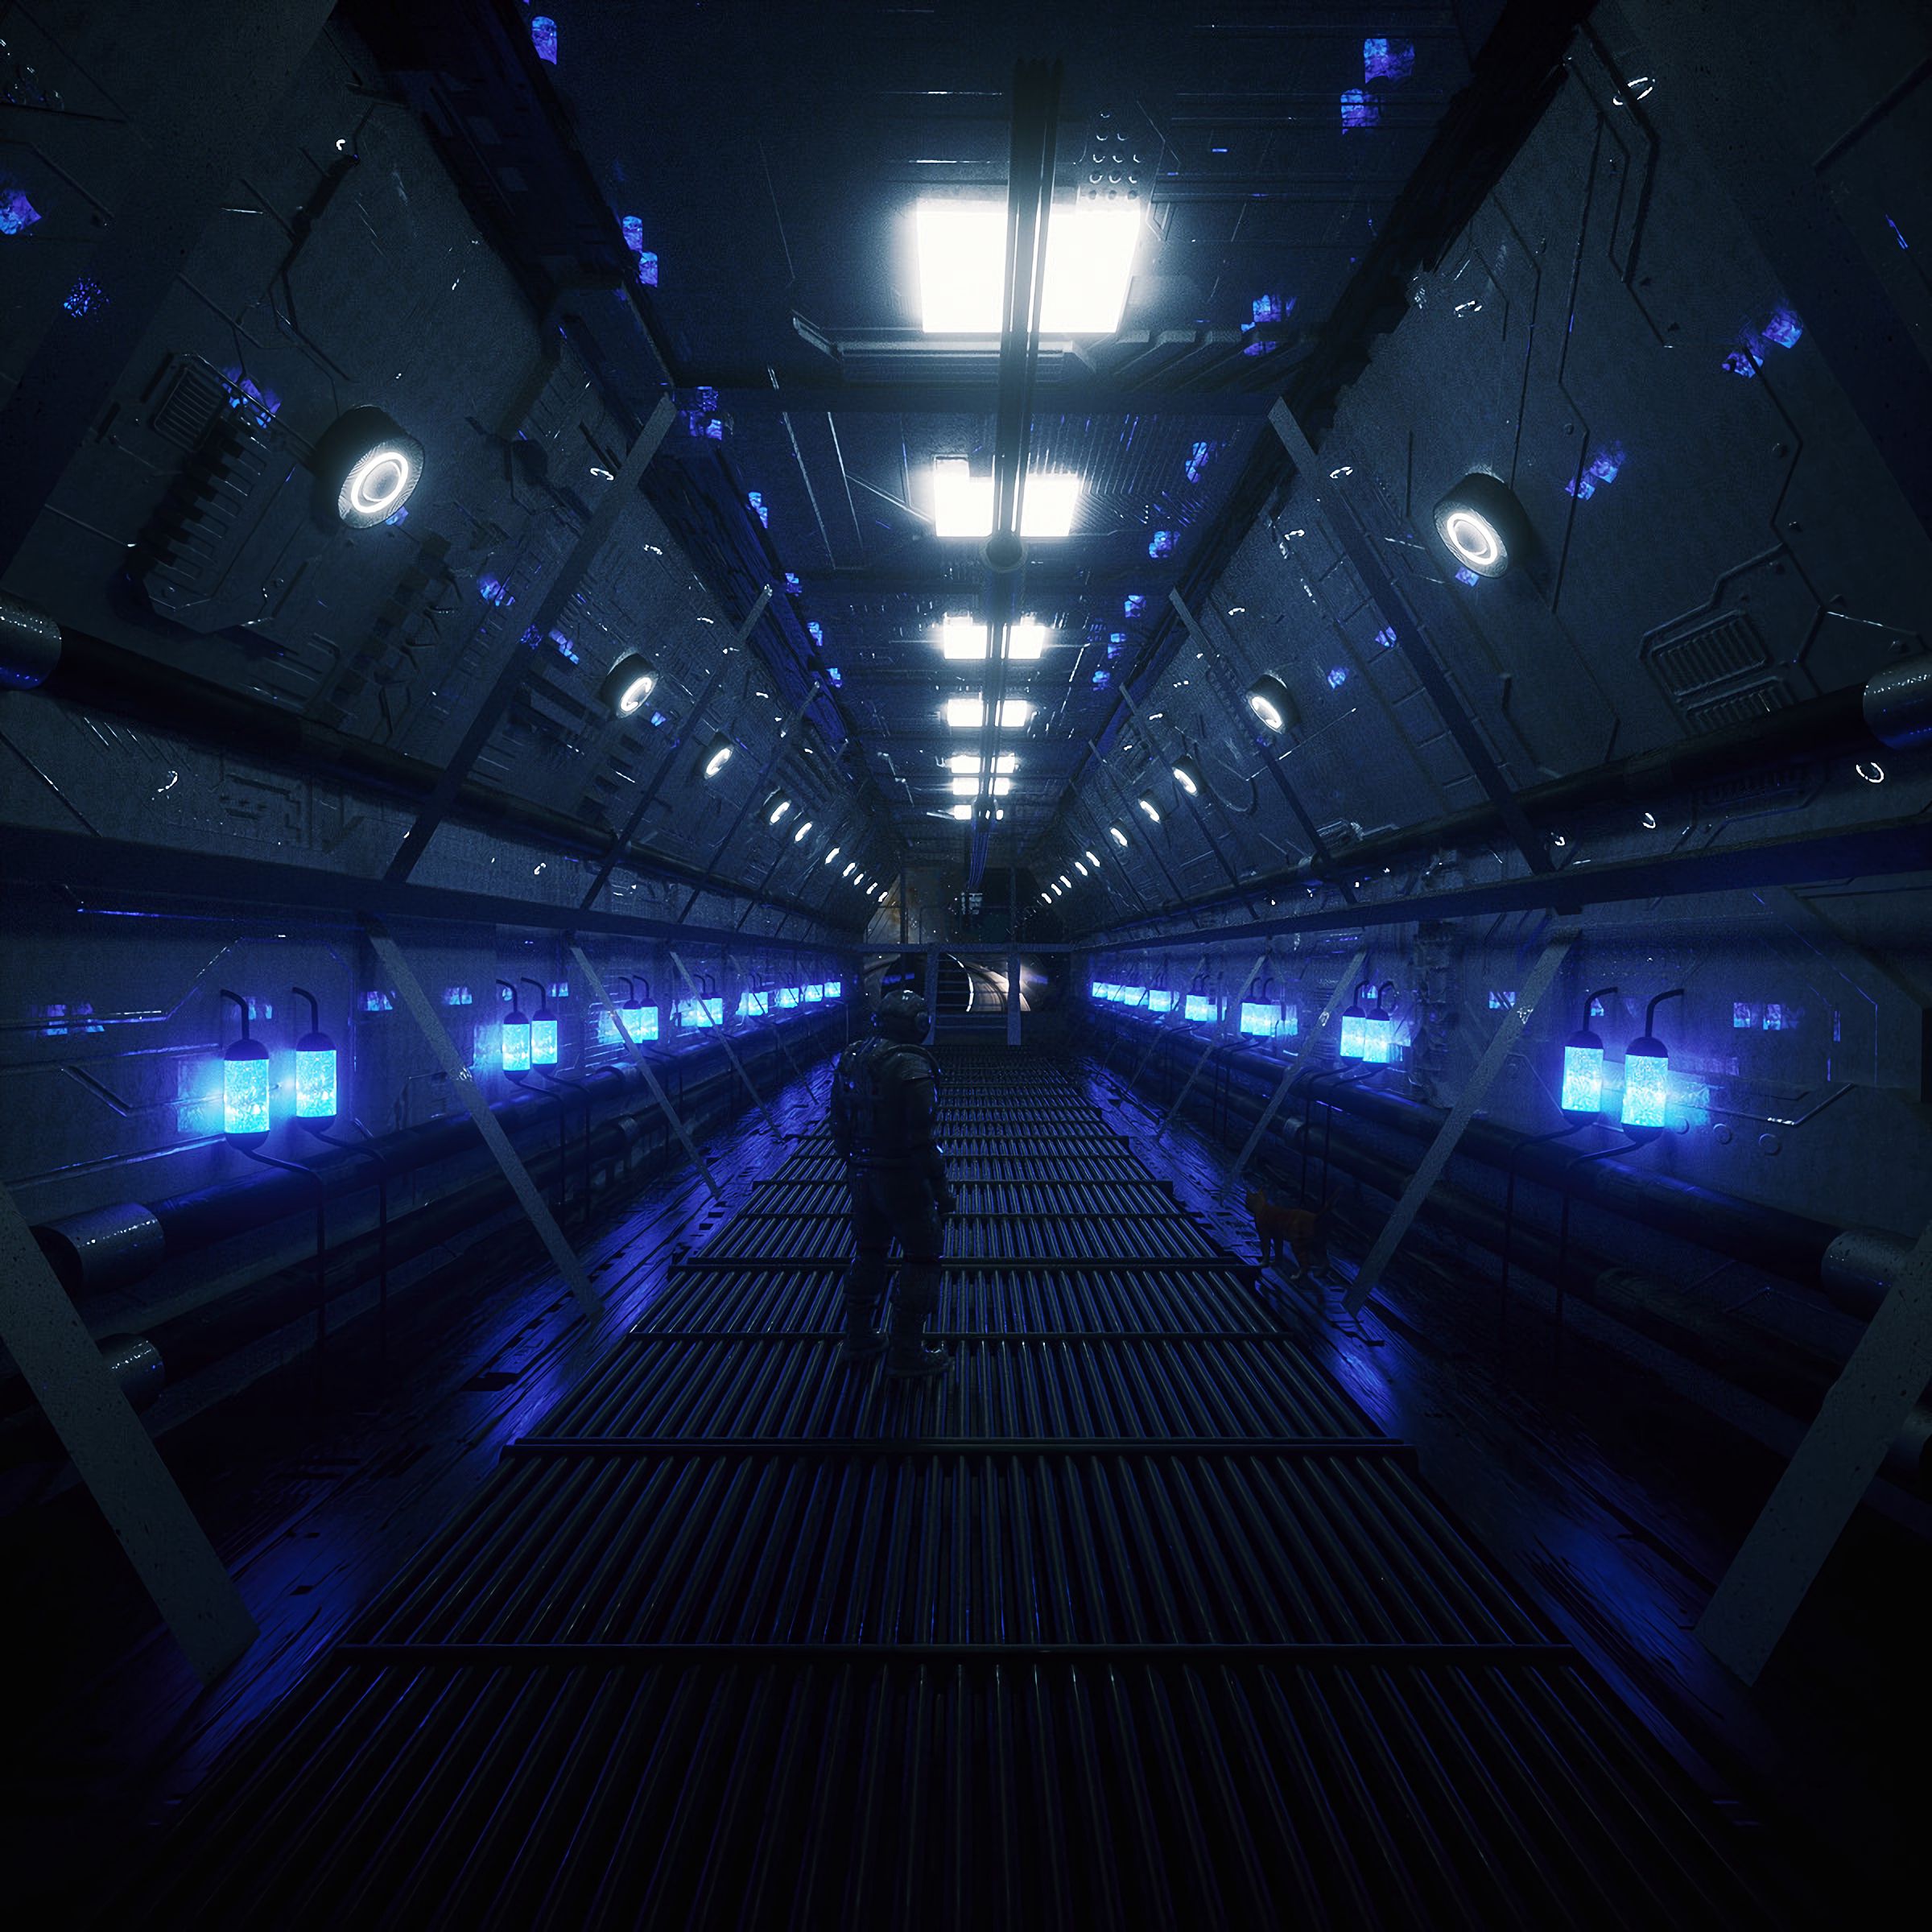 spaceship, backlight, person, art, illumination, human, station, spacesuit, space suit, render